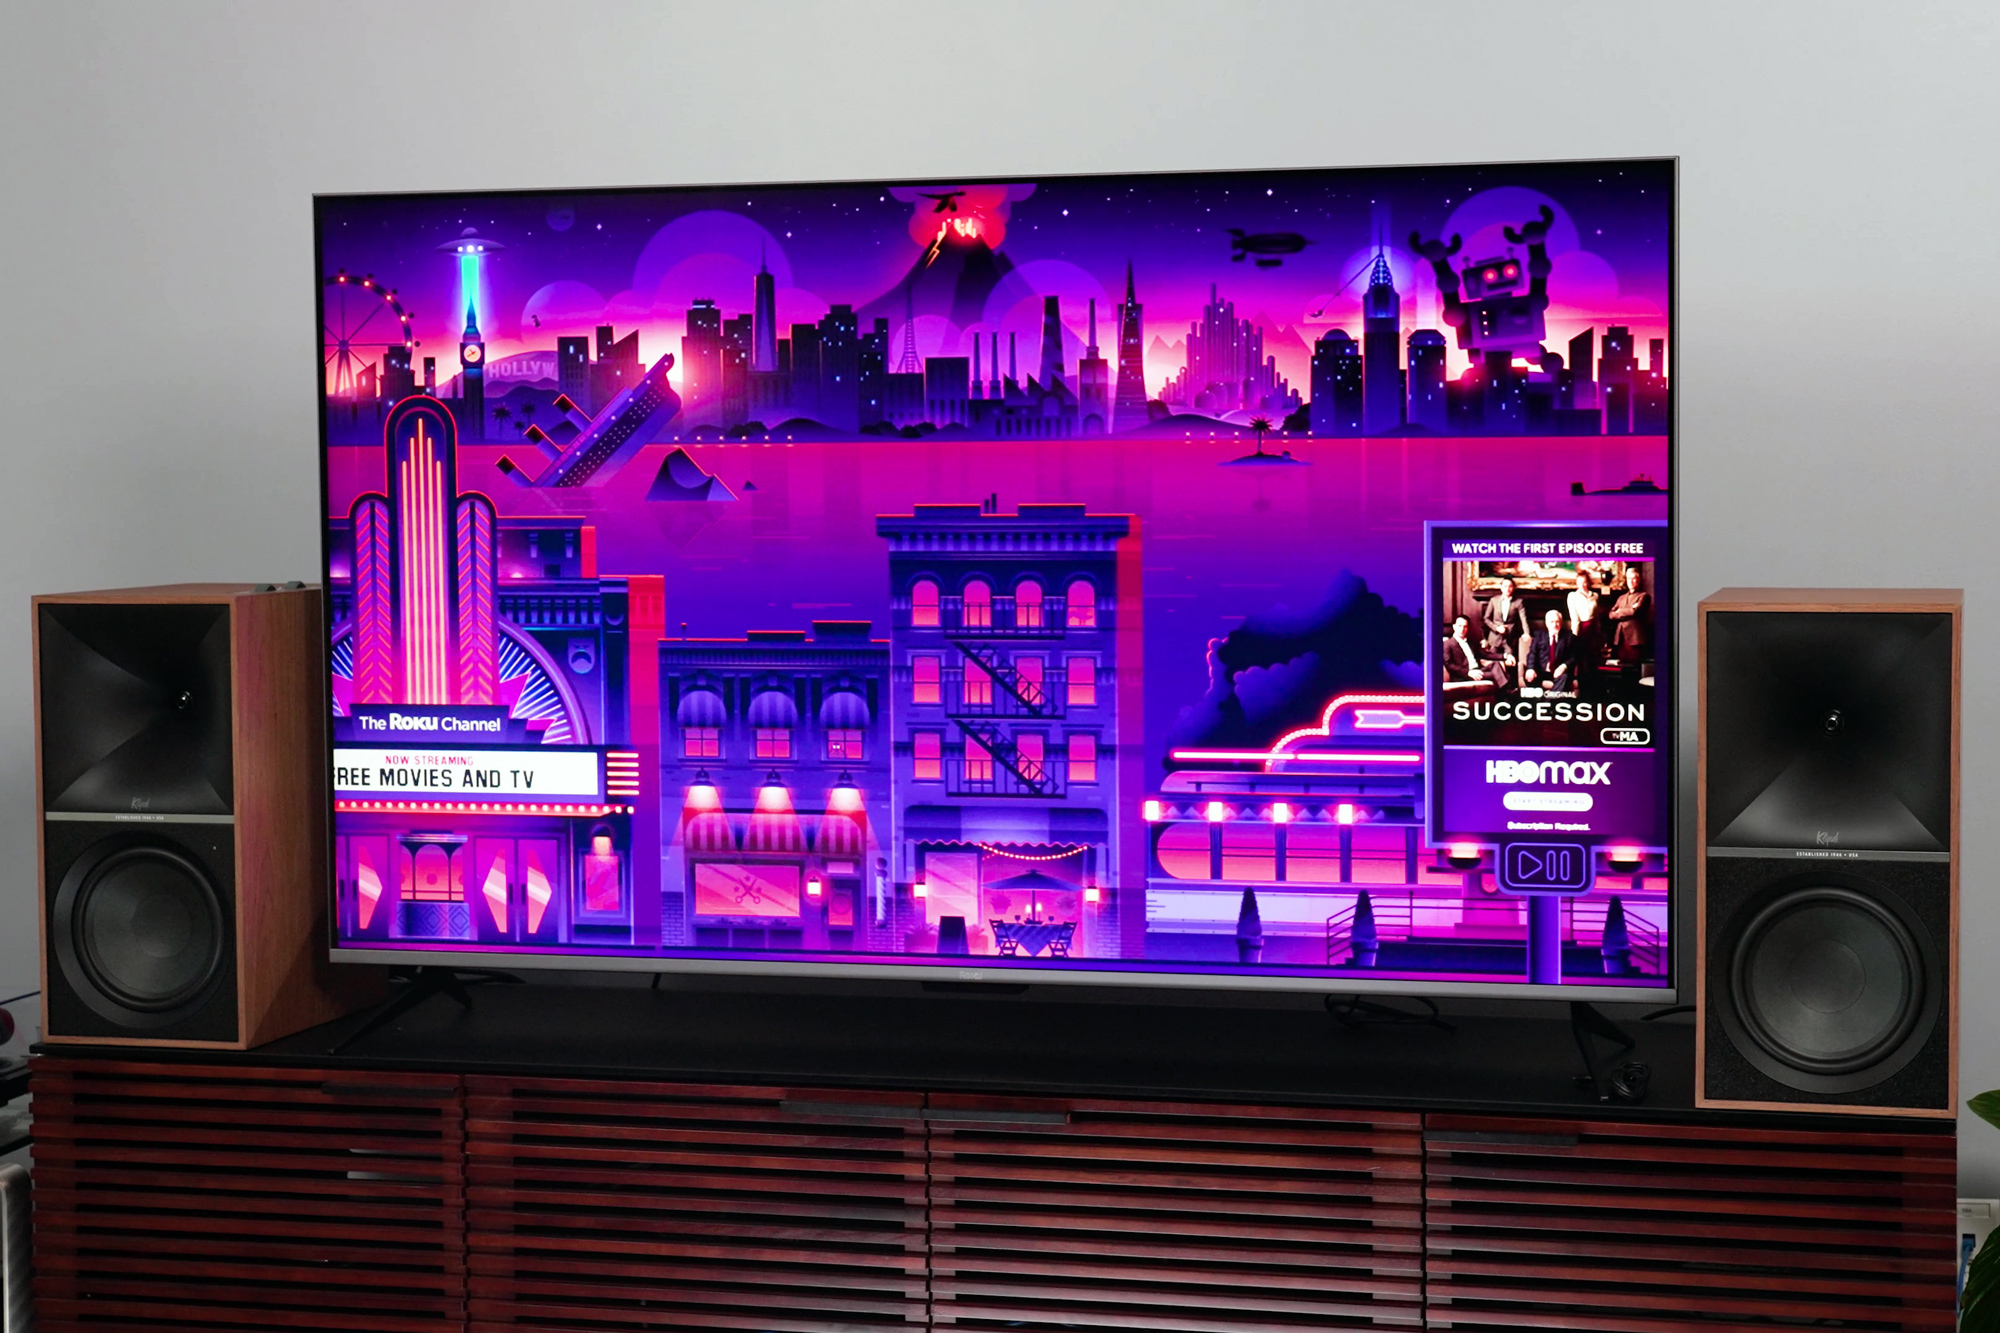 Don't miss - LG's brilliant 77-inch A2 OLED TV is $1,000 off at Best Buy